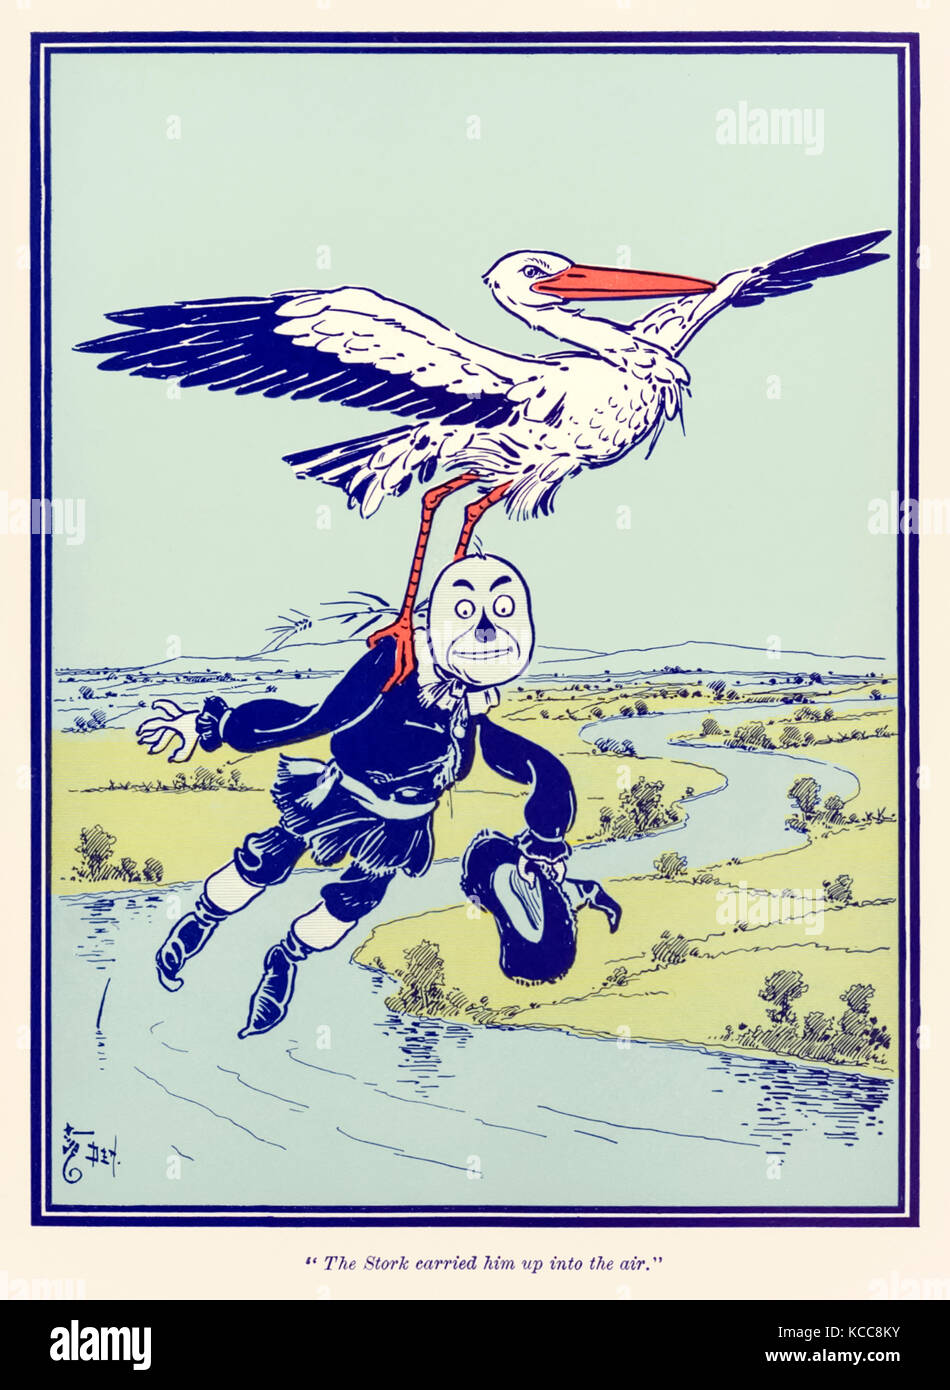 “The Stork carried him up into the air.” from ‘The Wonderful Wizard of Oz’ by L. Frank Baum (1856-1919) with pictures by W. W. Denslow (1856-1915). See more information below. Stock Photo